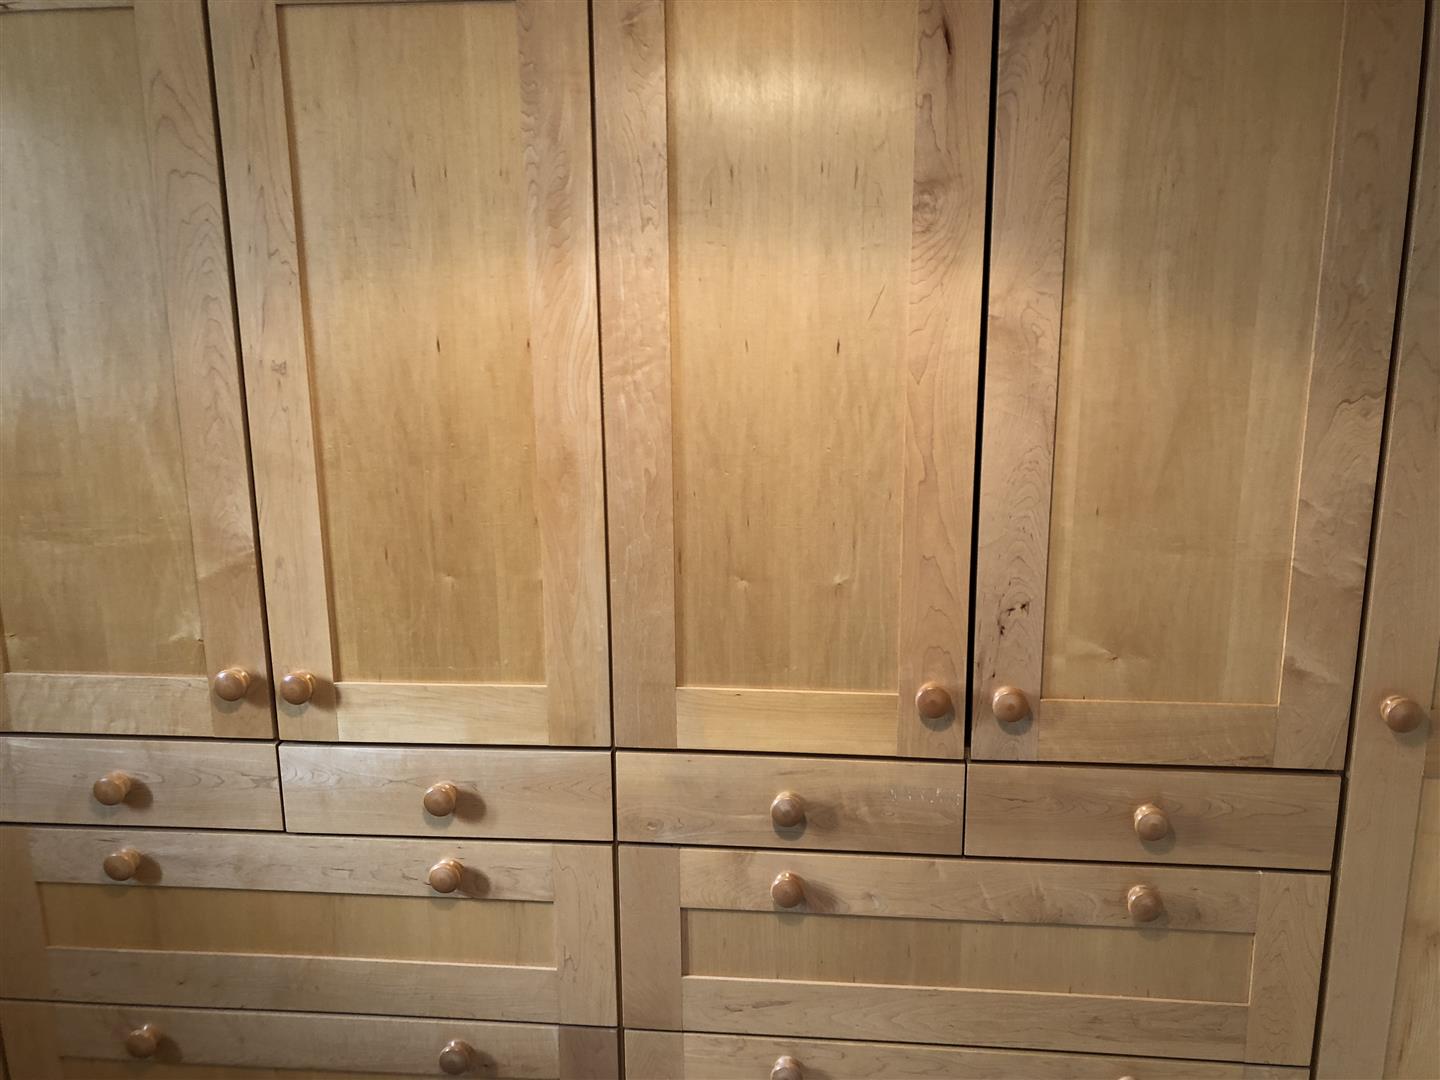 A close up of the built-in maple wardrobe and drawers.